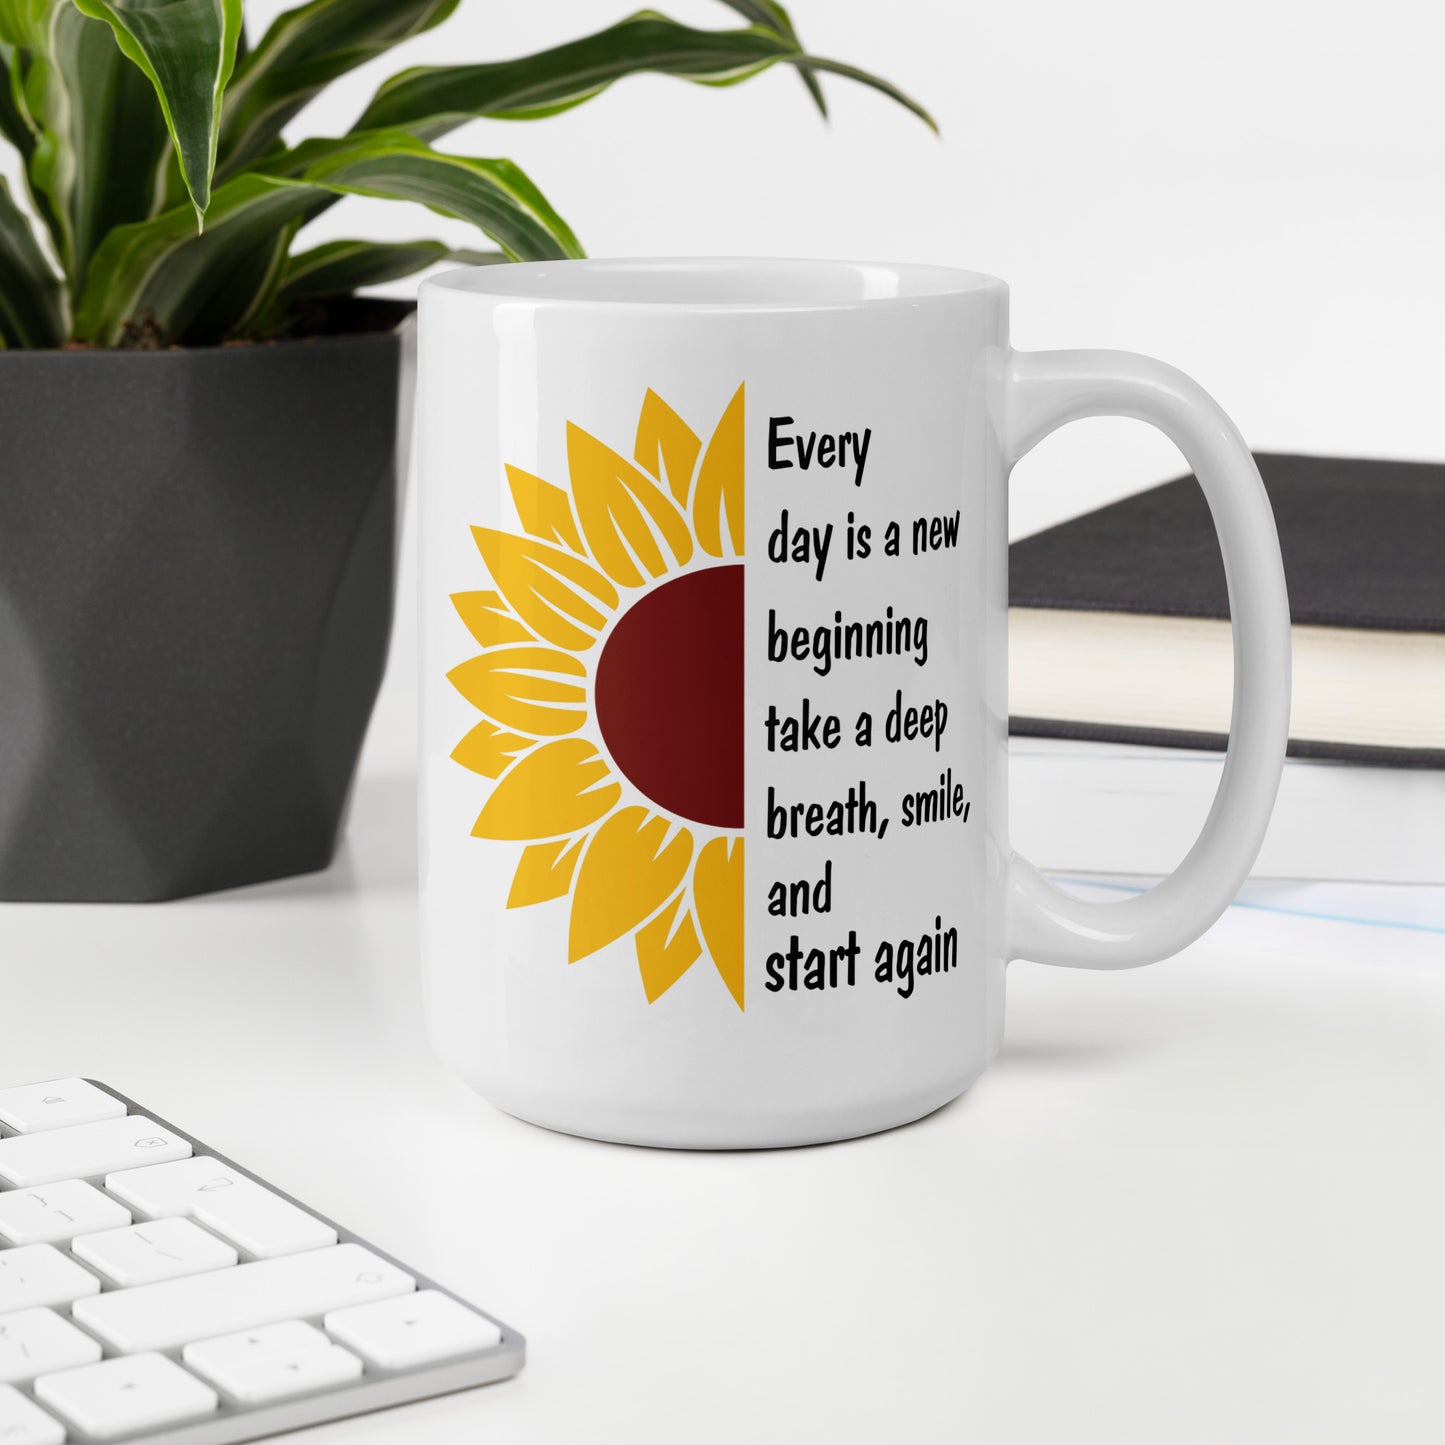 Every Day is a New Beginning White Ceramic Coffee Mug